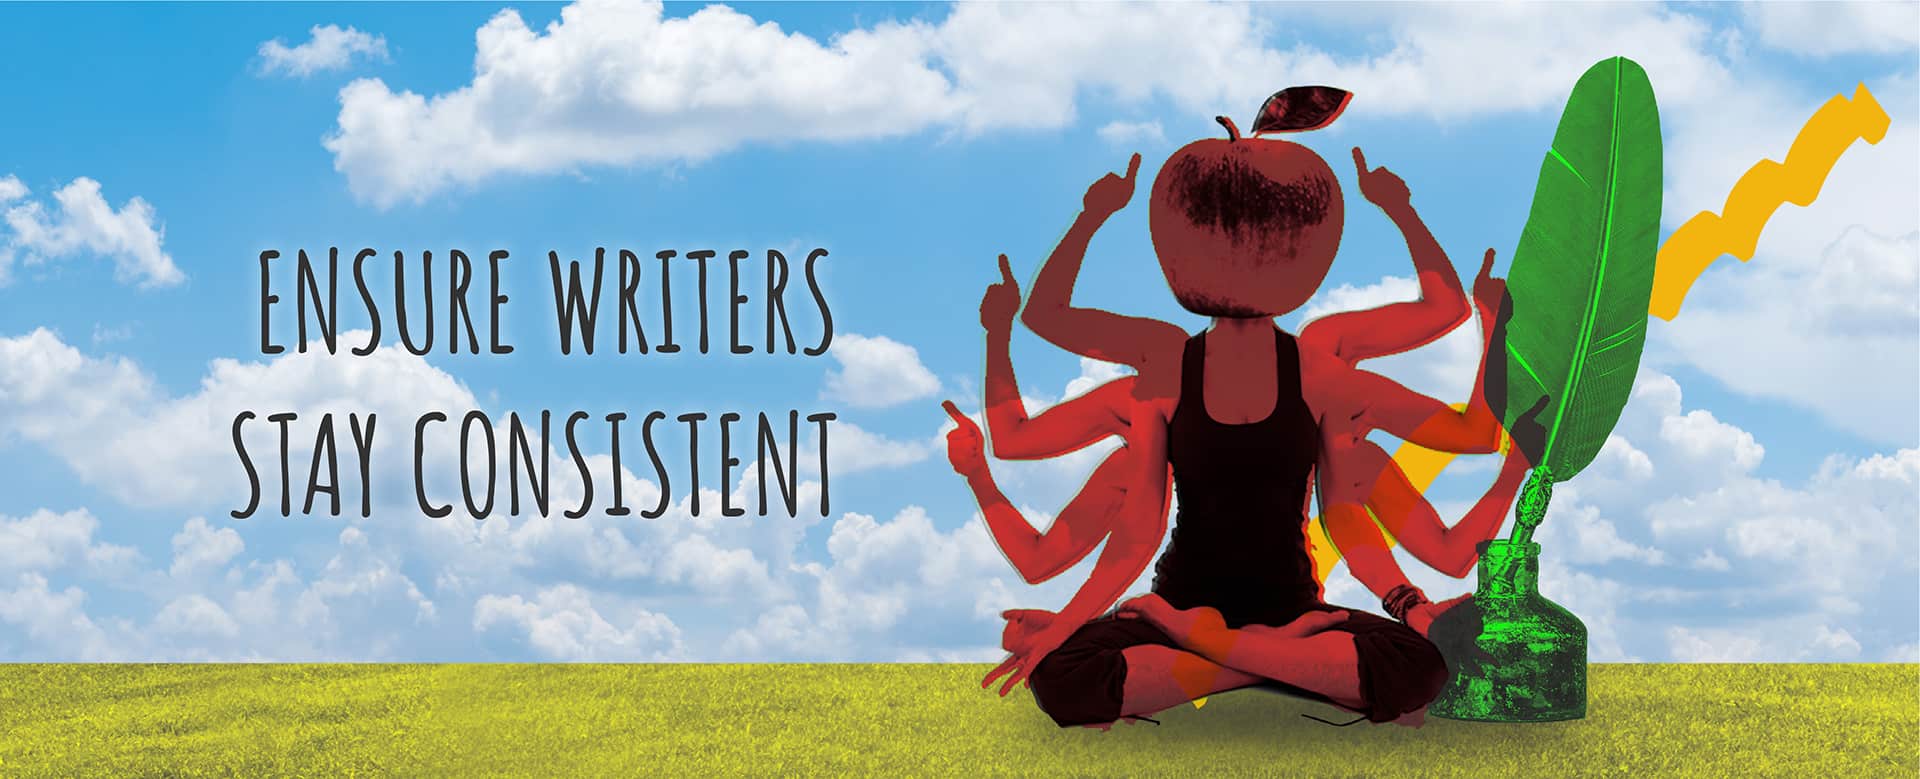 Ensure Writers Stay Consistent